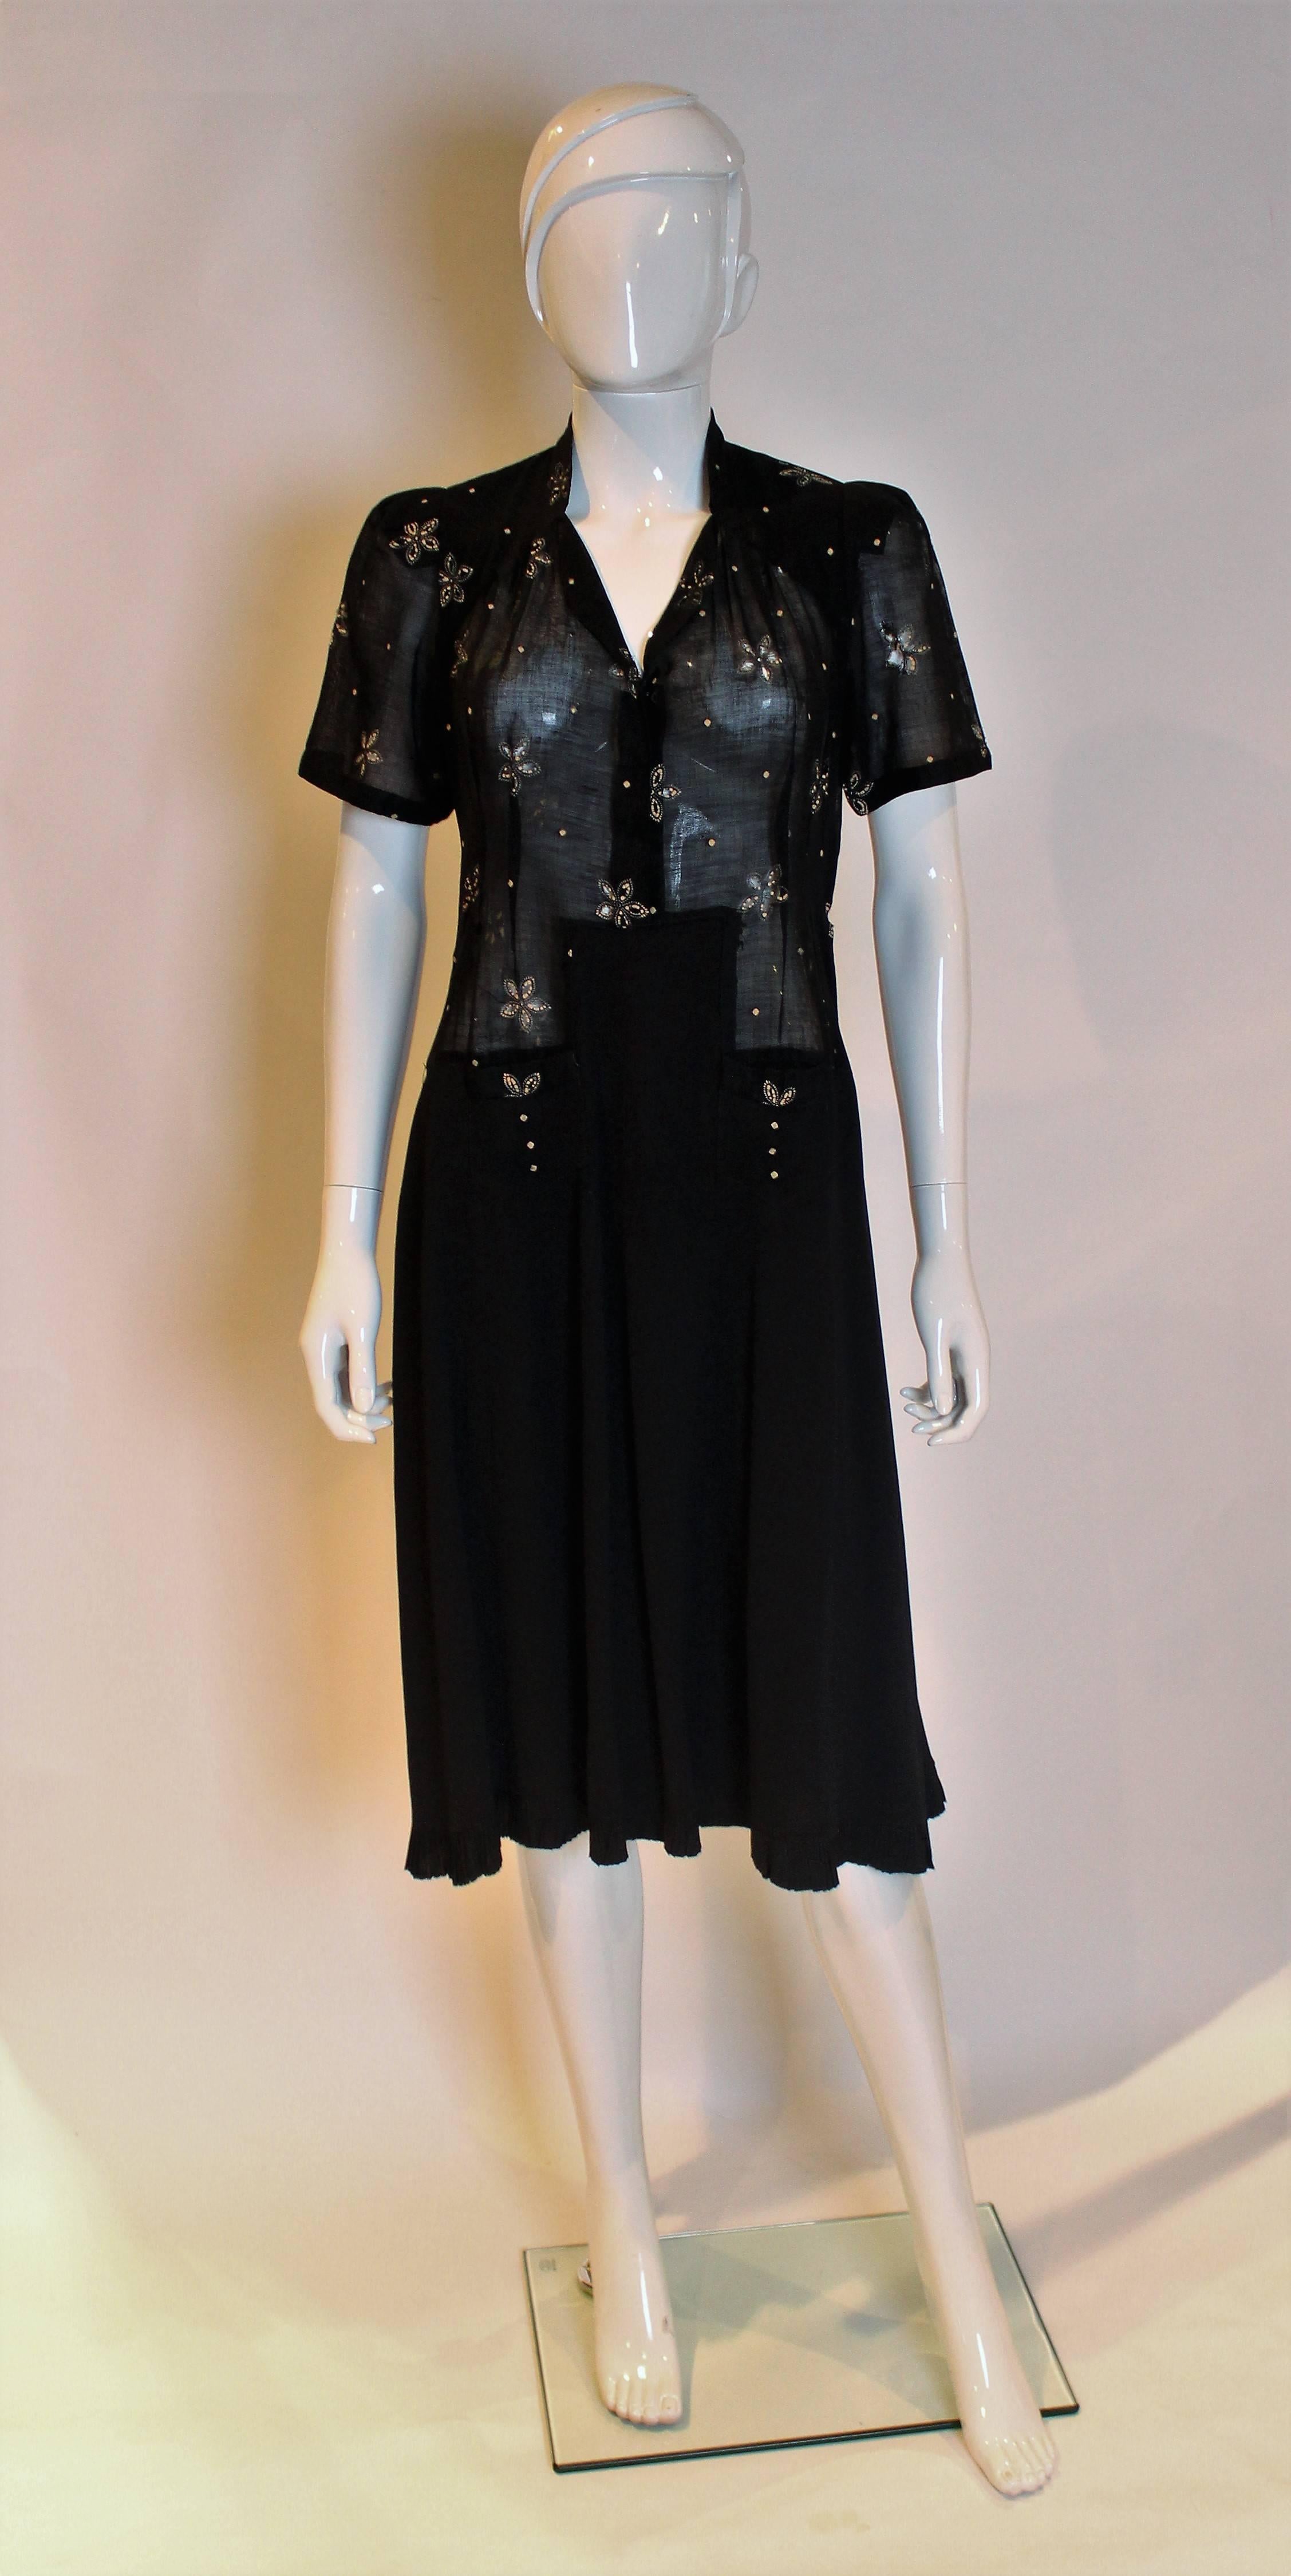 A chic dress from the 1940s. The bodice is a cotton net like fabric with hand painted flowers and cut out petals. The dress has a sweet hear neckline and short sleeves,and it opens at the front and side with hooks and eyes. The skirt is black crepe